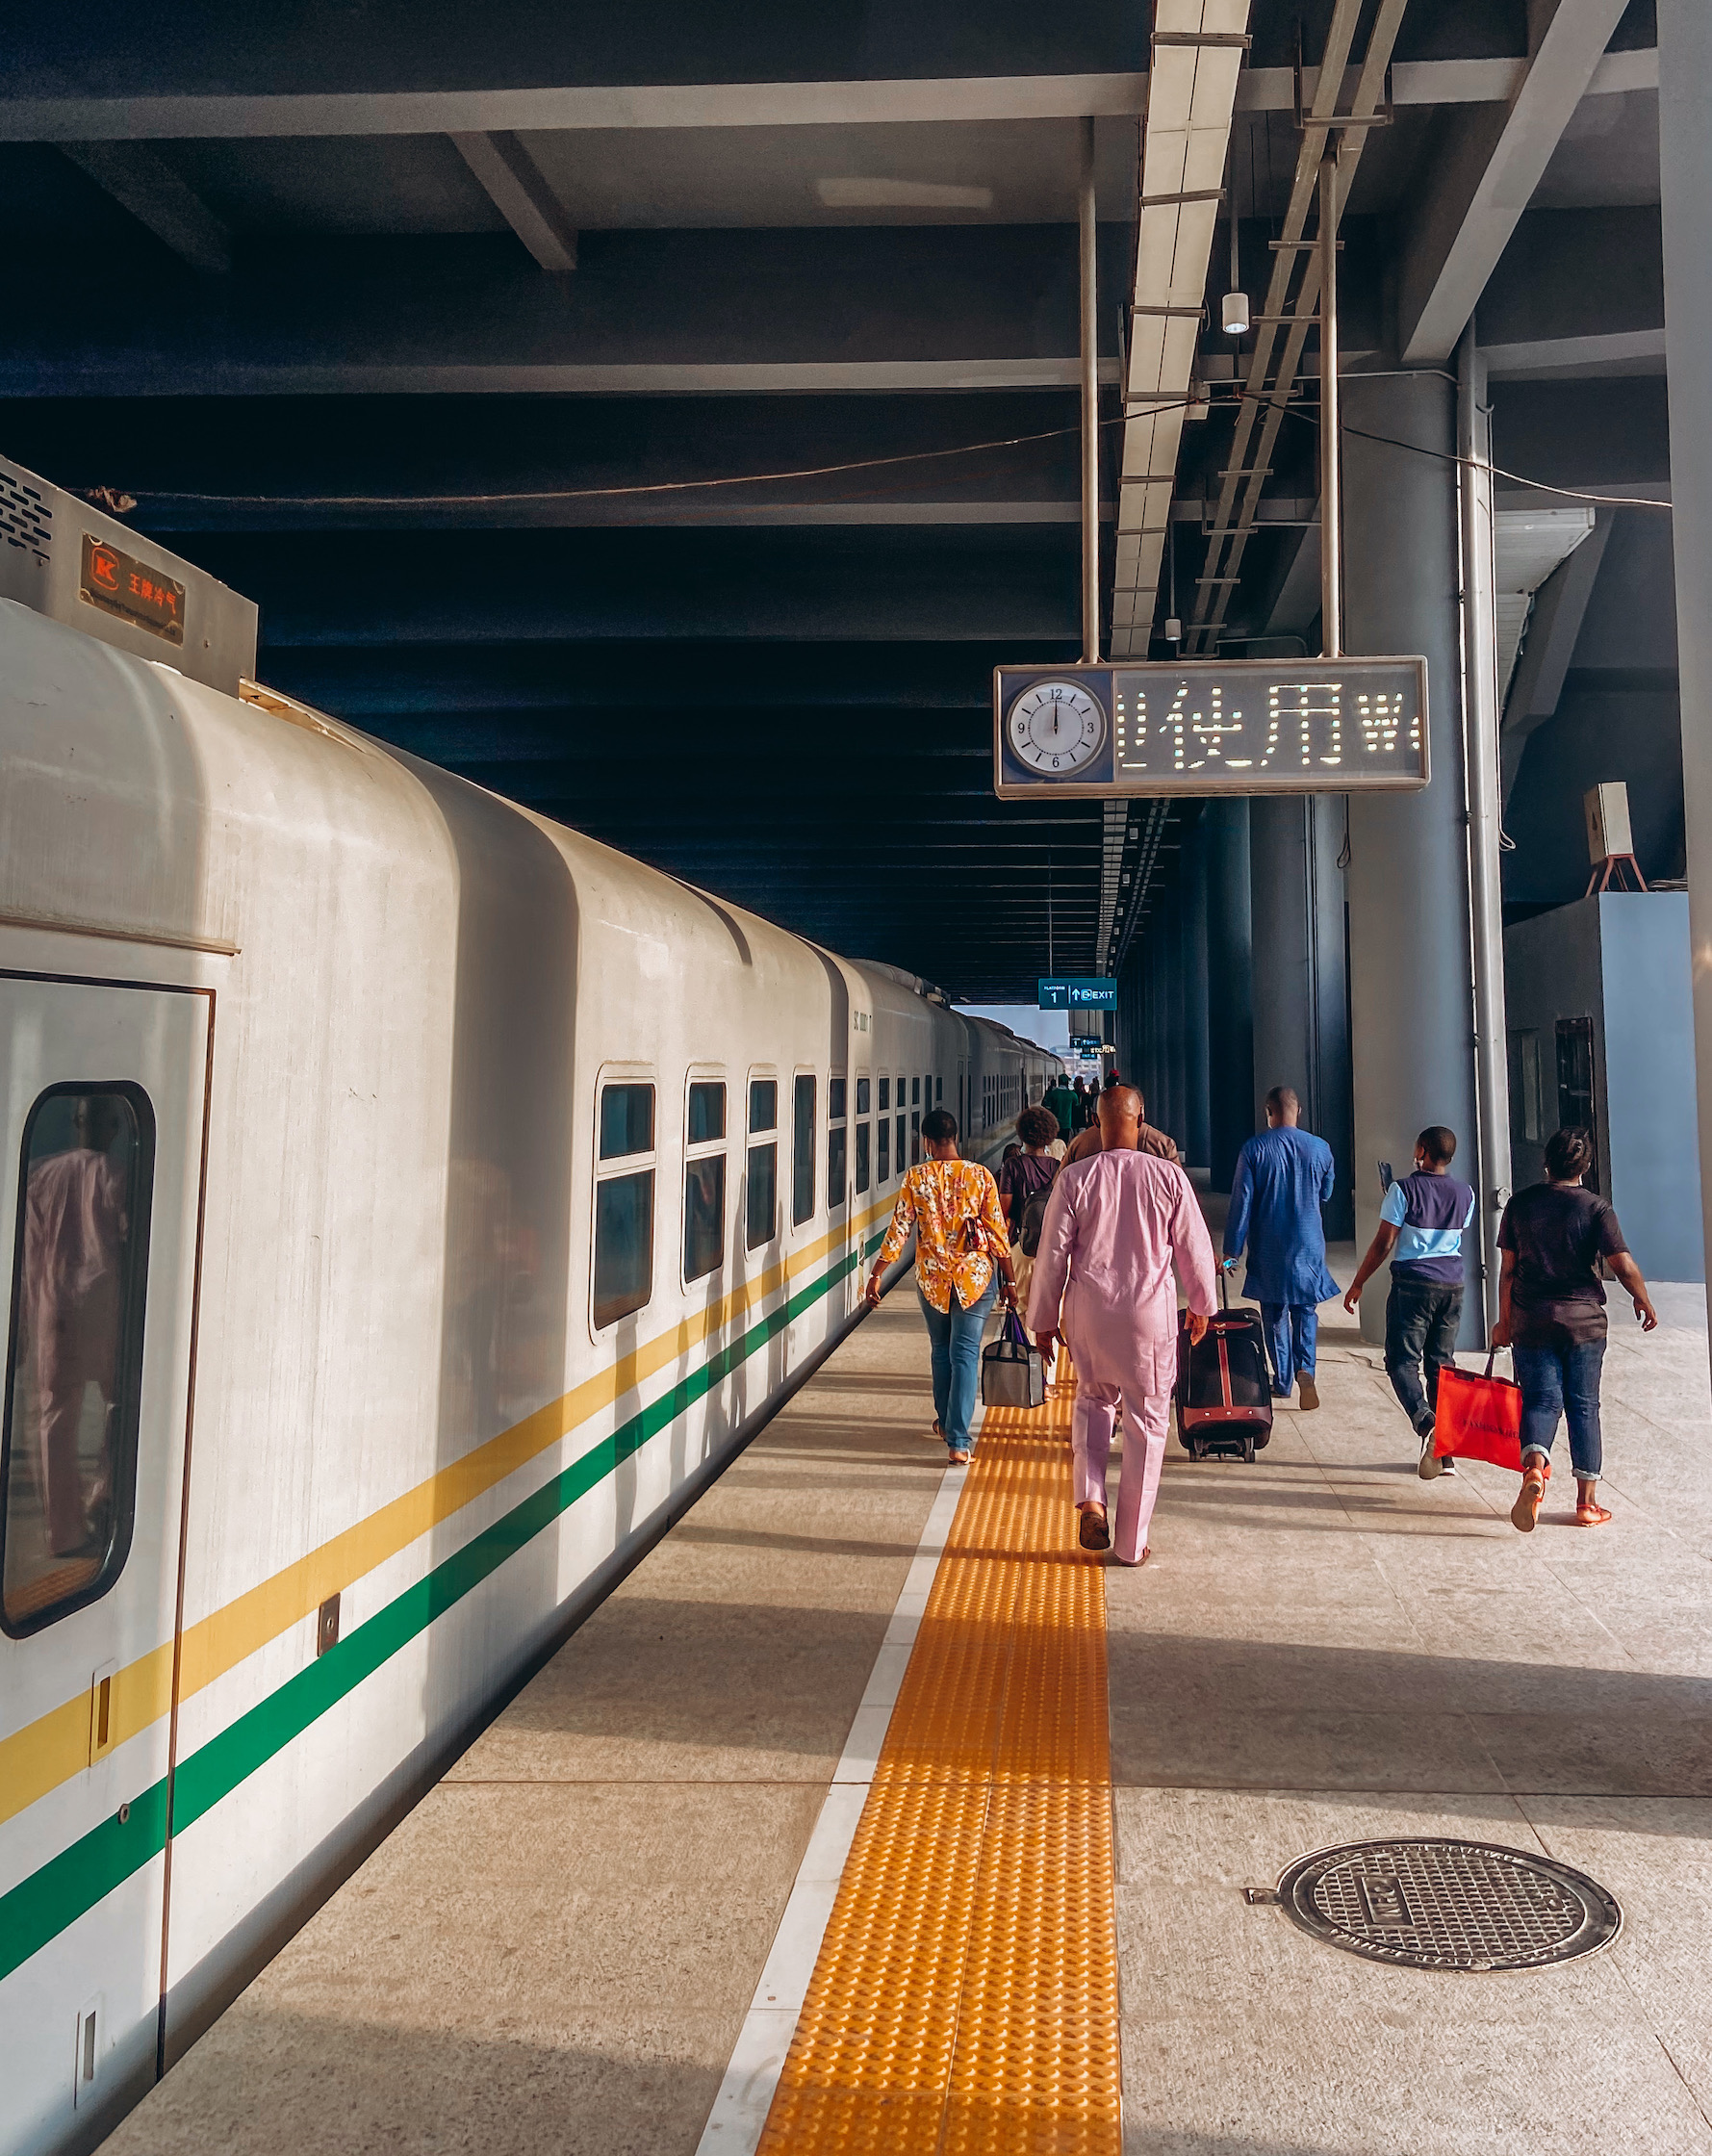 The new train station in Lagos